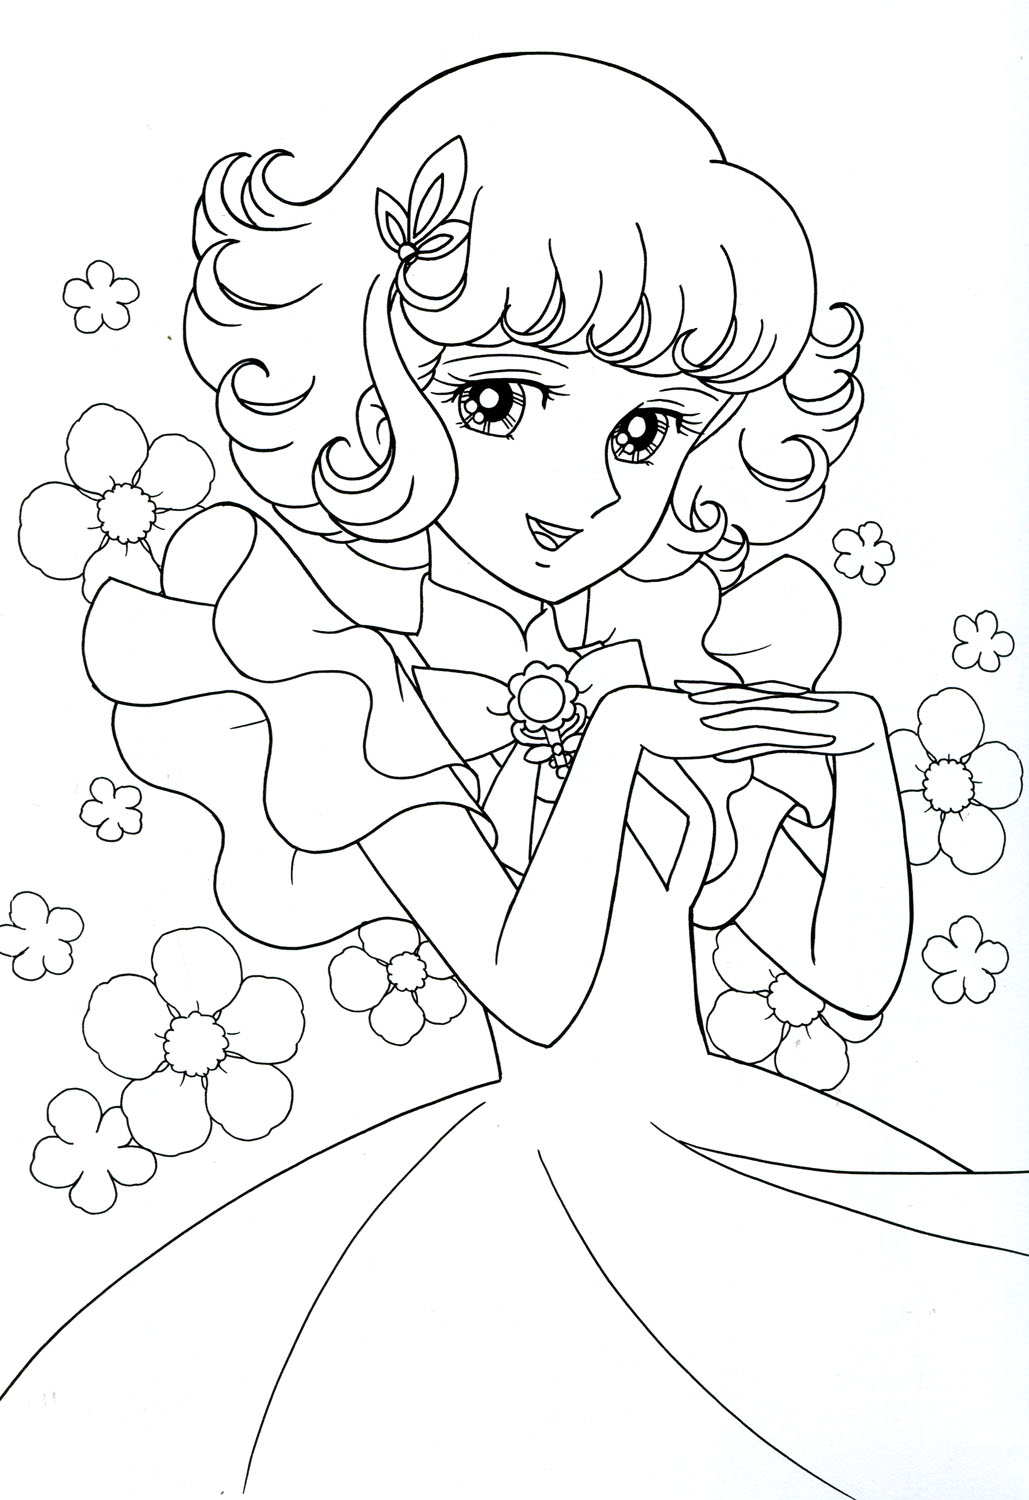 Molly Harrison free coloring page 2015 Davlin Publishing adultcoloring Davlin Publishing adultcoloring Halloween Pinterest